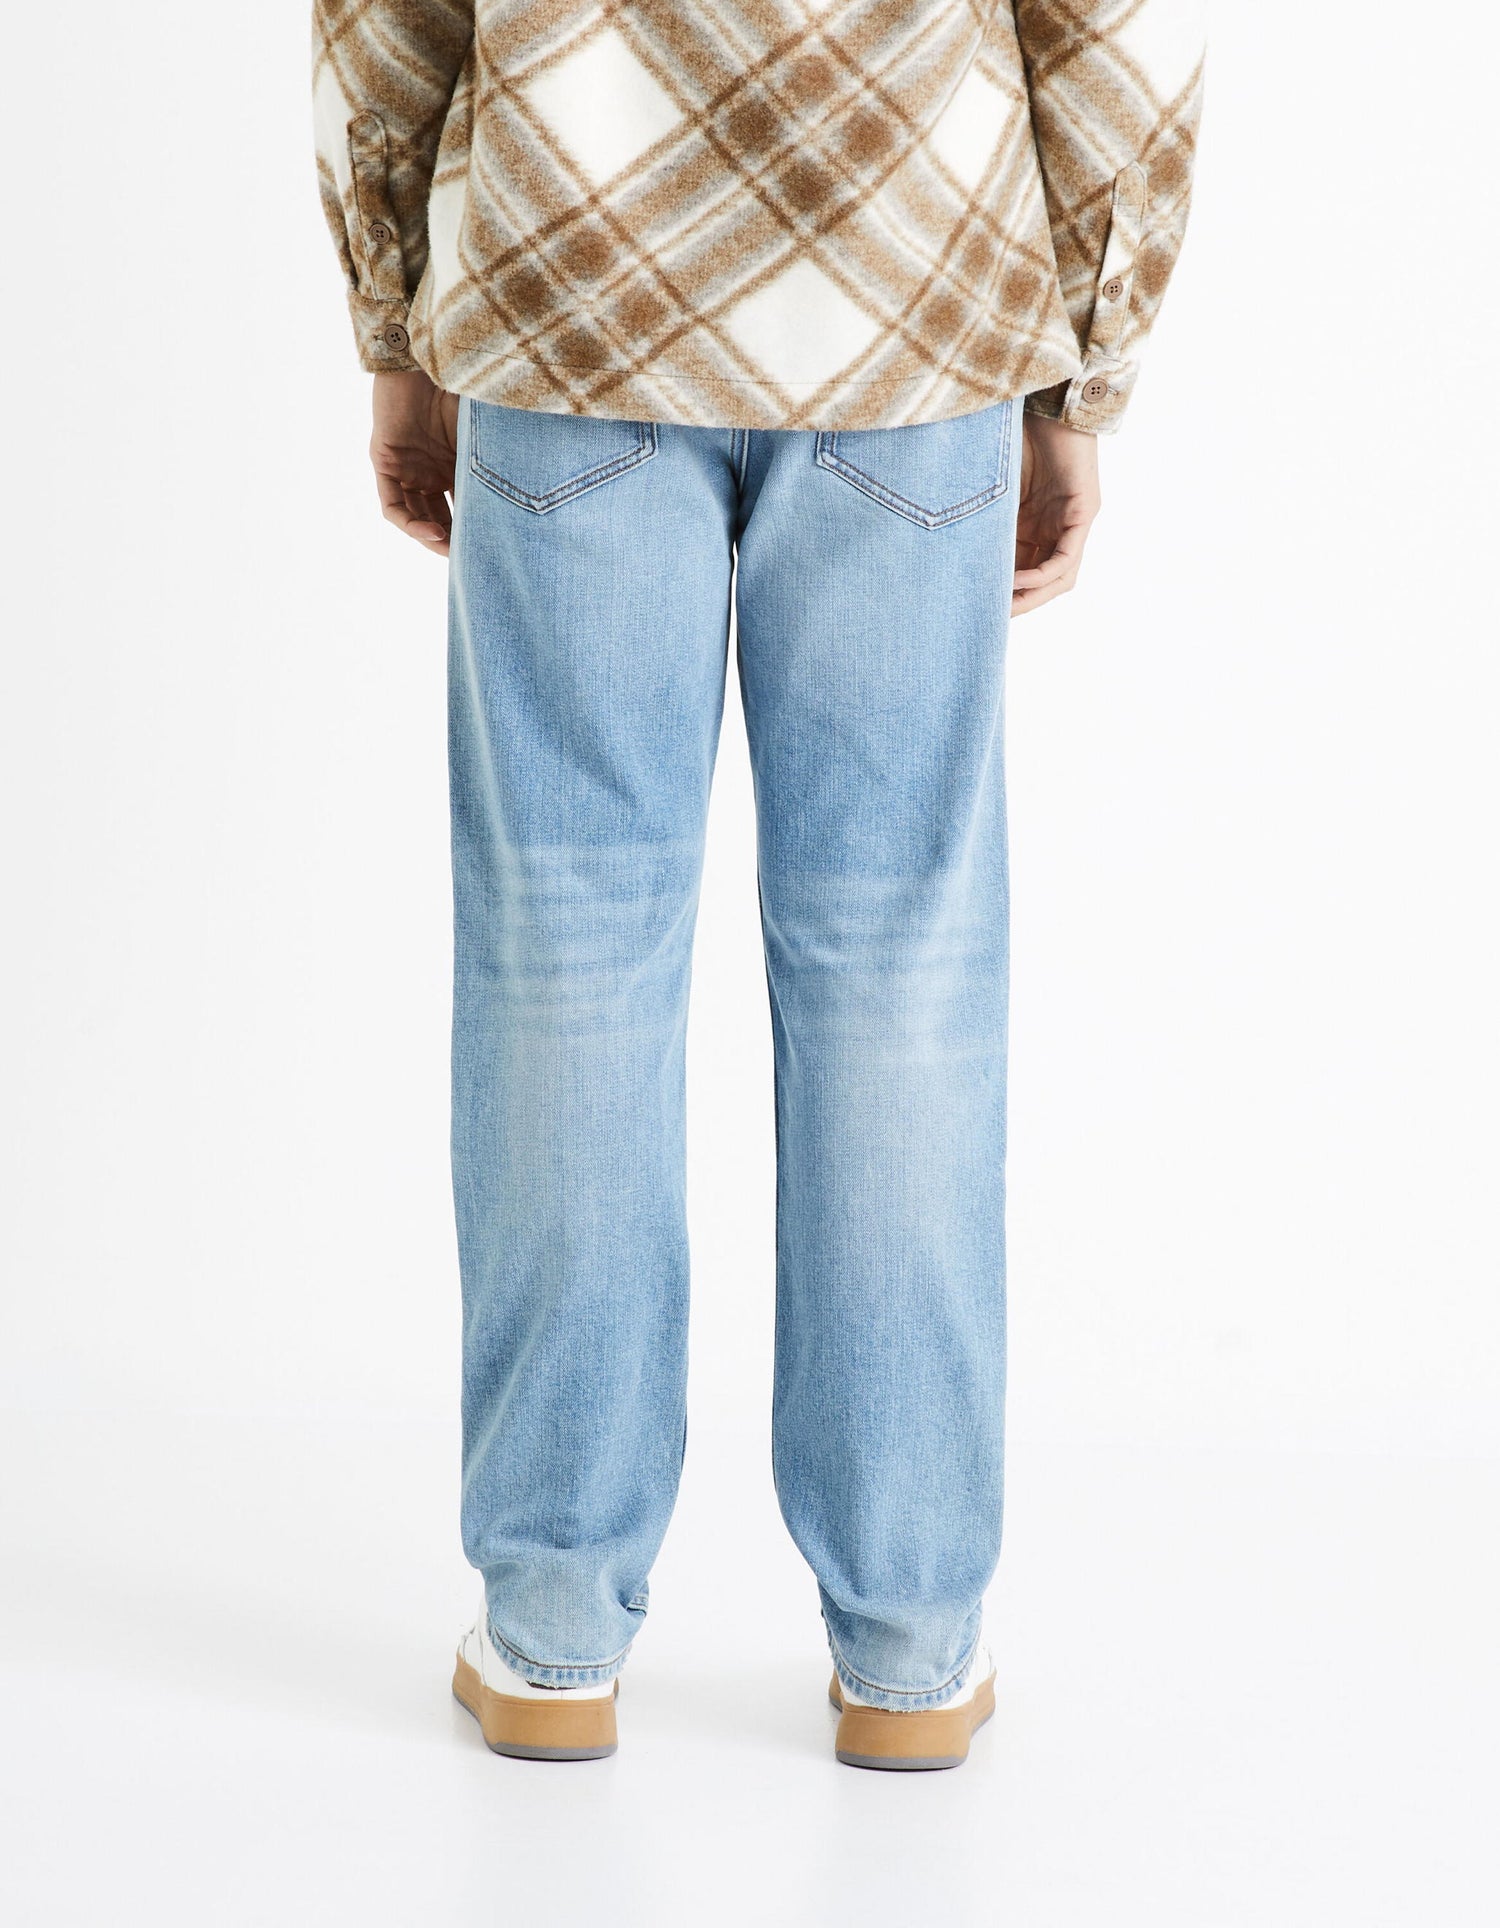 C15 Straight Jeans 3 Lengths - Bleached_STRAIGHT3L_BLEACHED_04